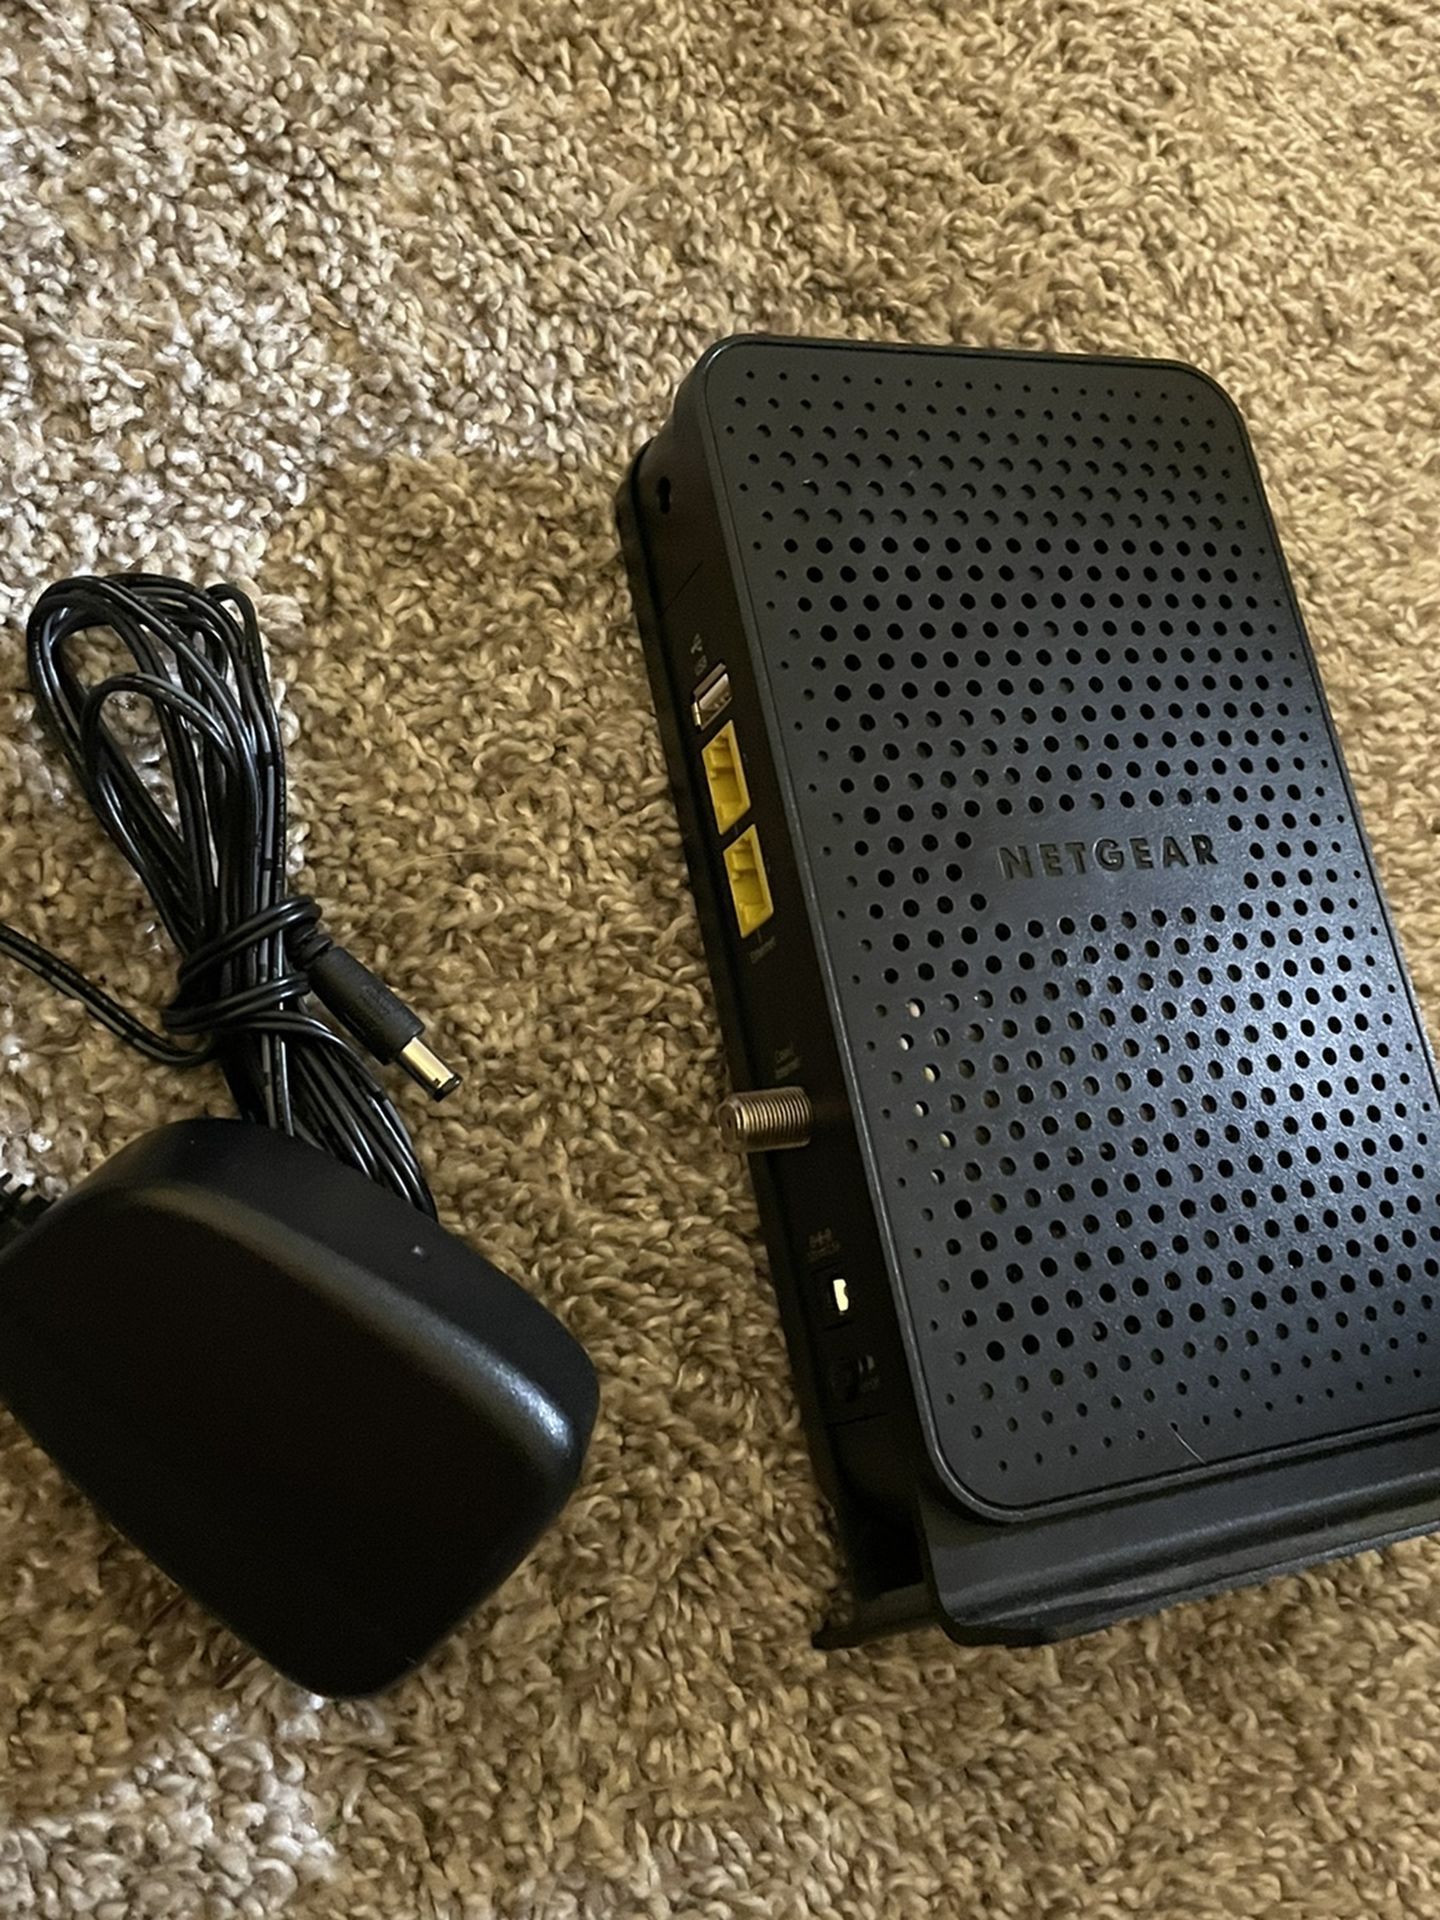 Netgear N600 Router and cable modem Combo